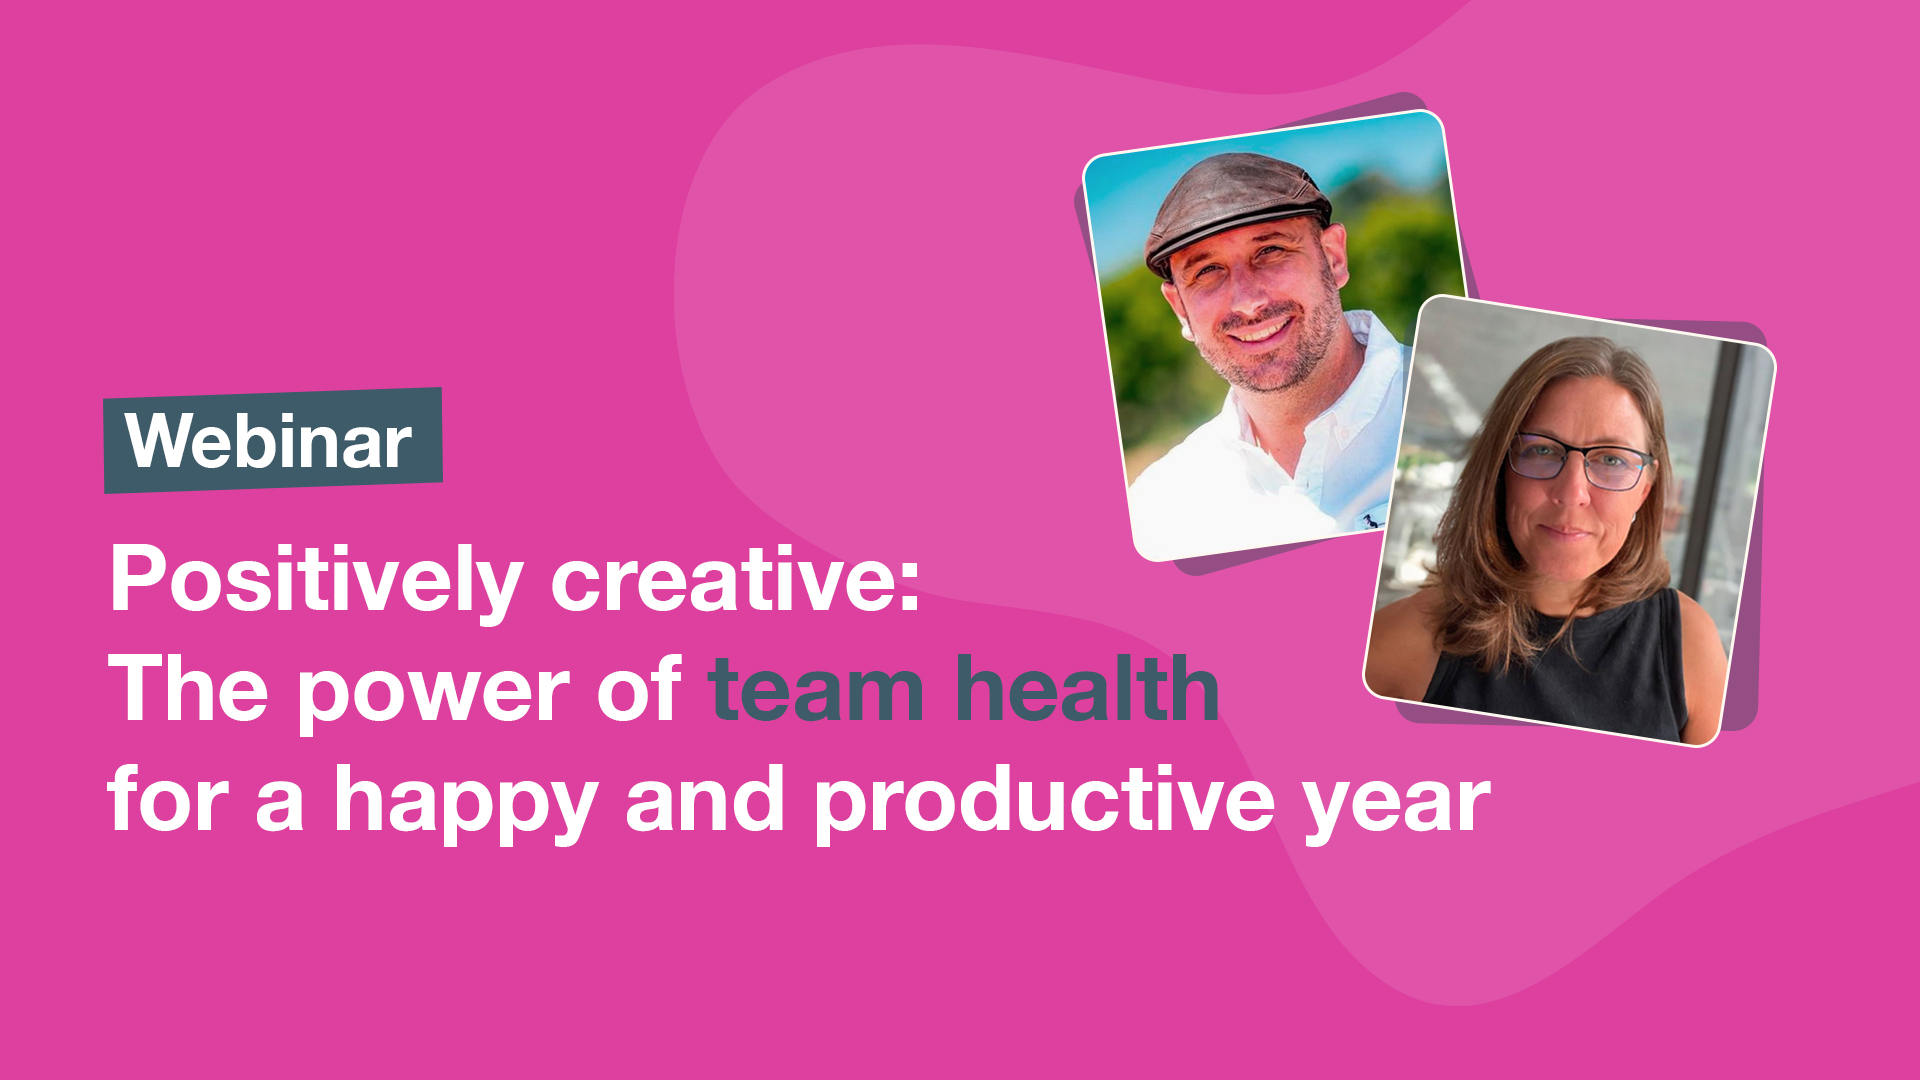 Positively creative: The power of team health for a happy and productive year